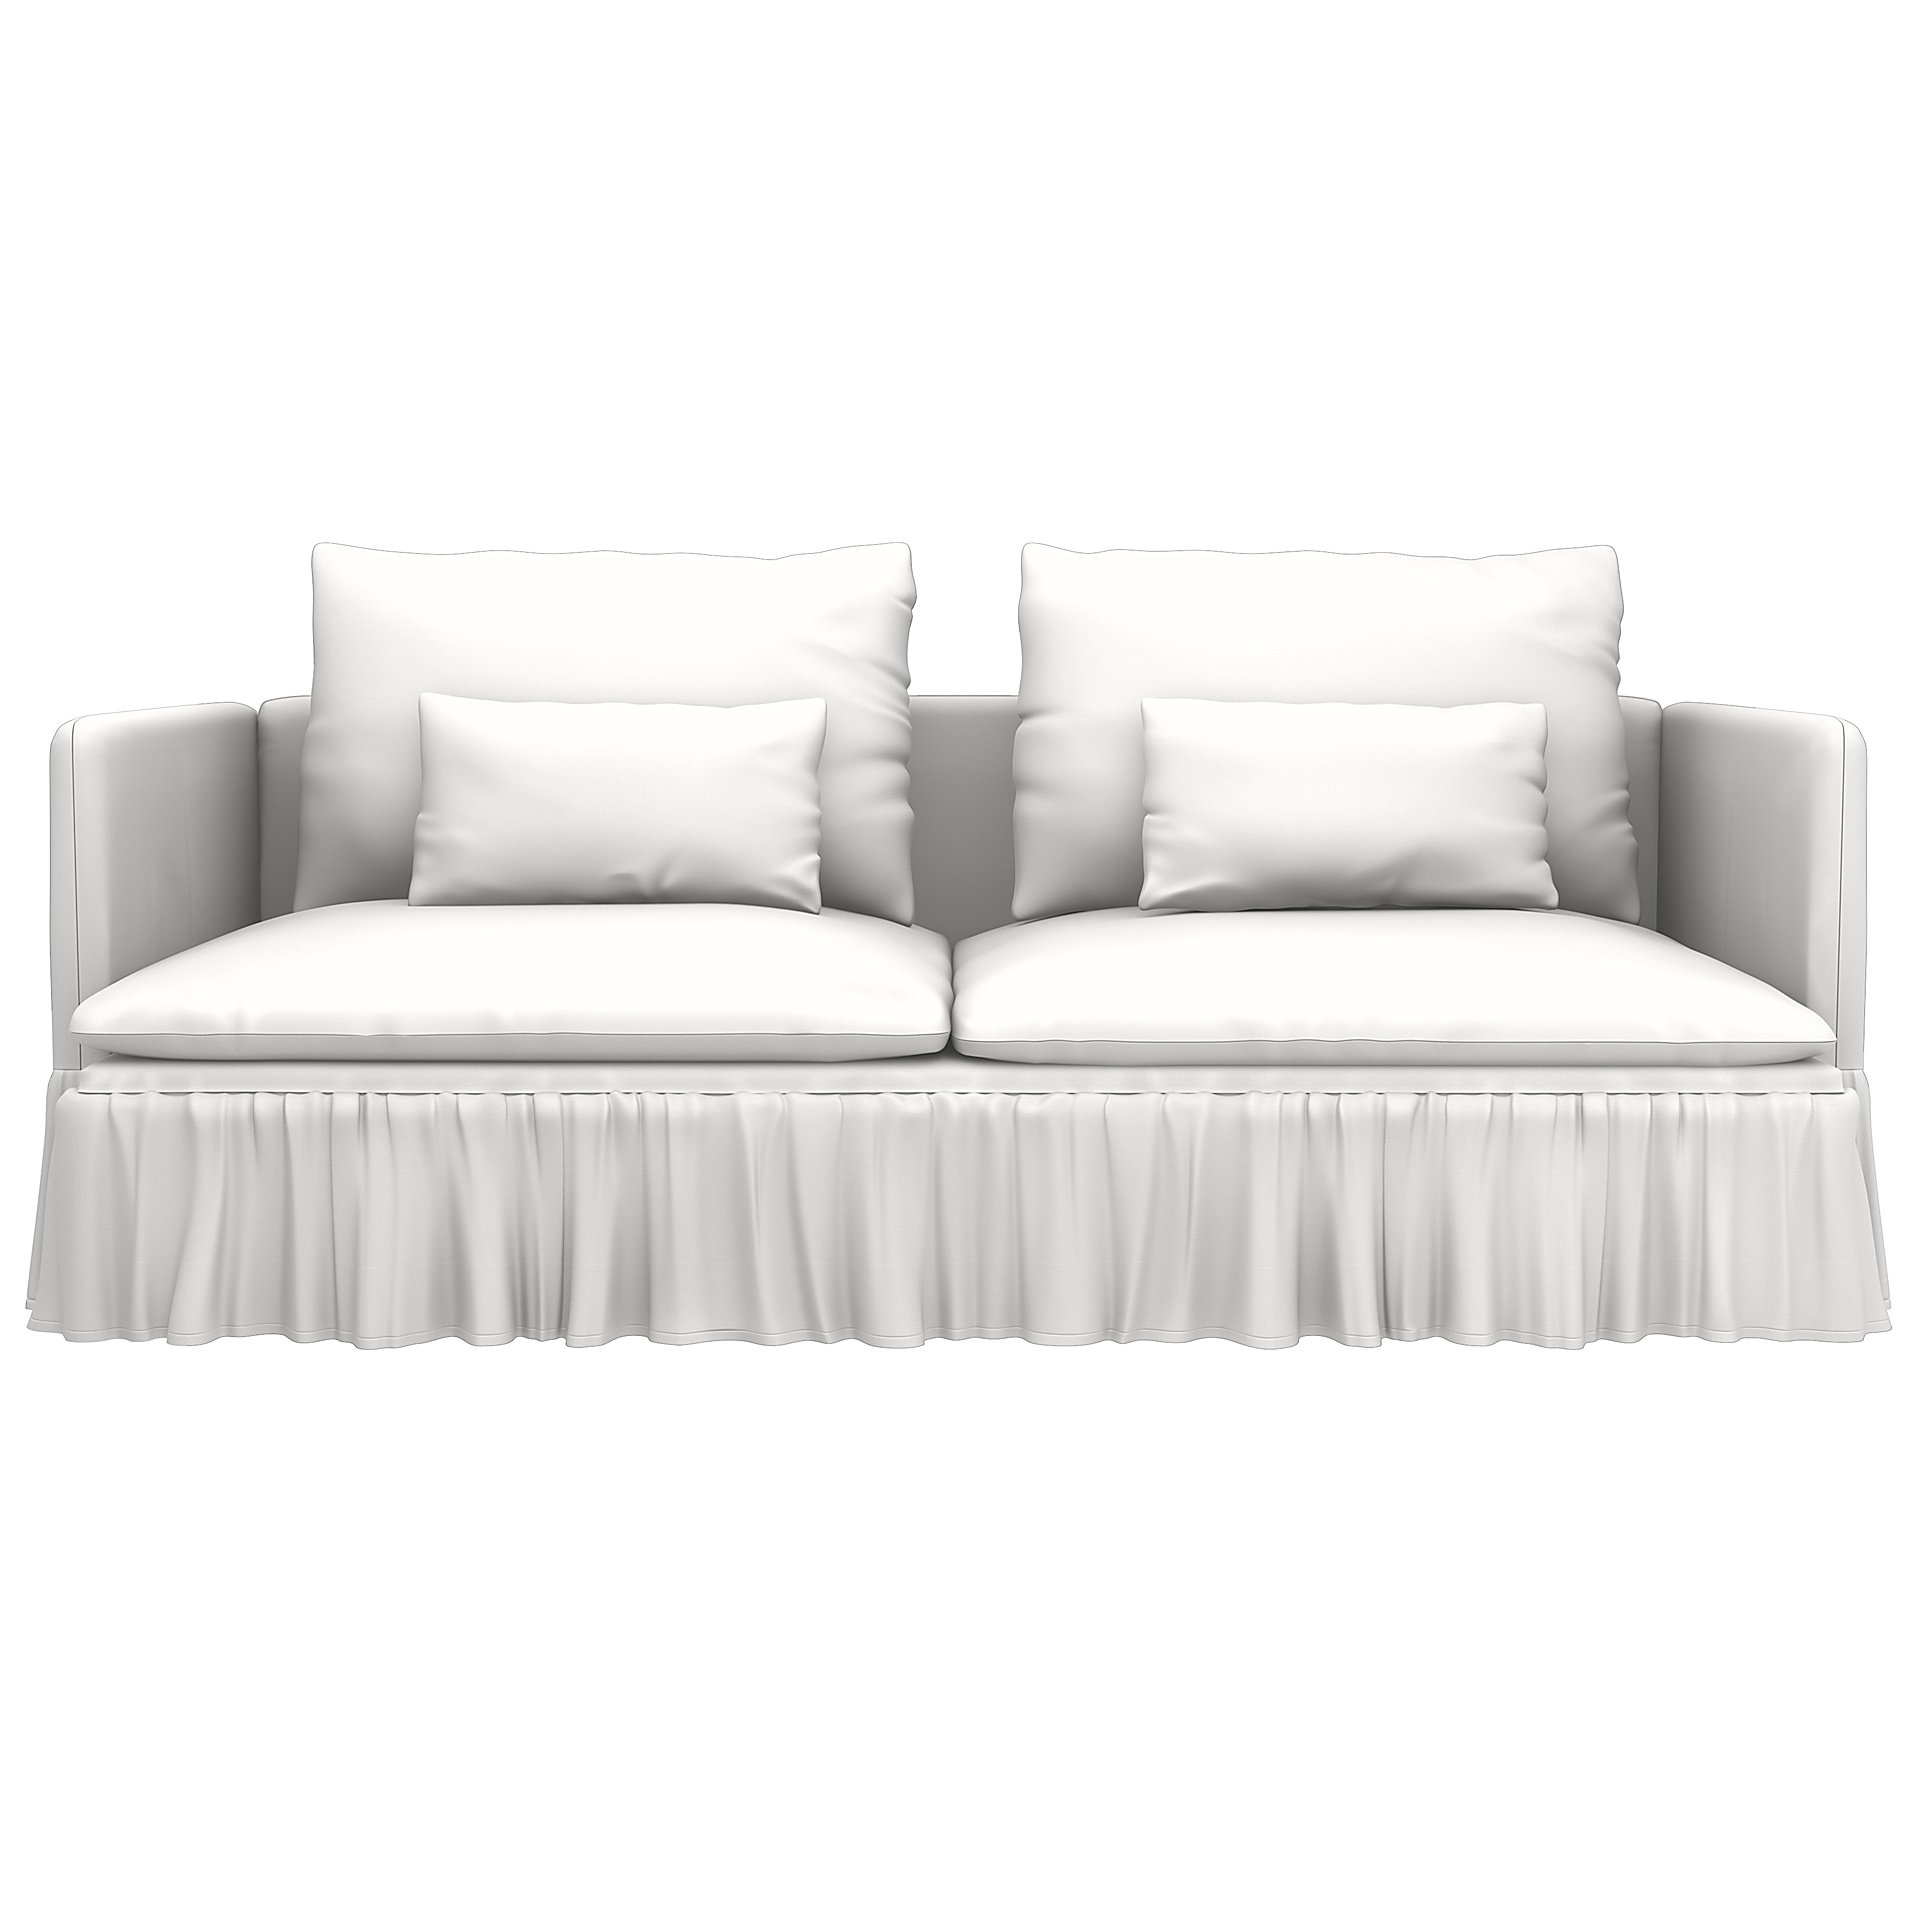 IKEA - Soderhamn 3 seater sofa with armrests cover, Absolute White, Cotton - Bemz